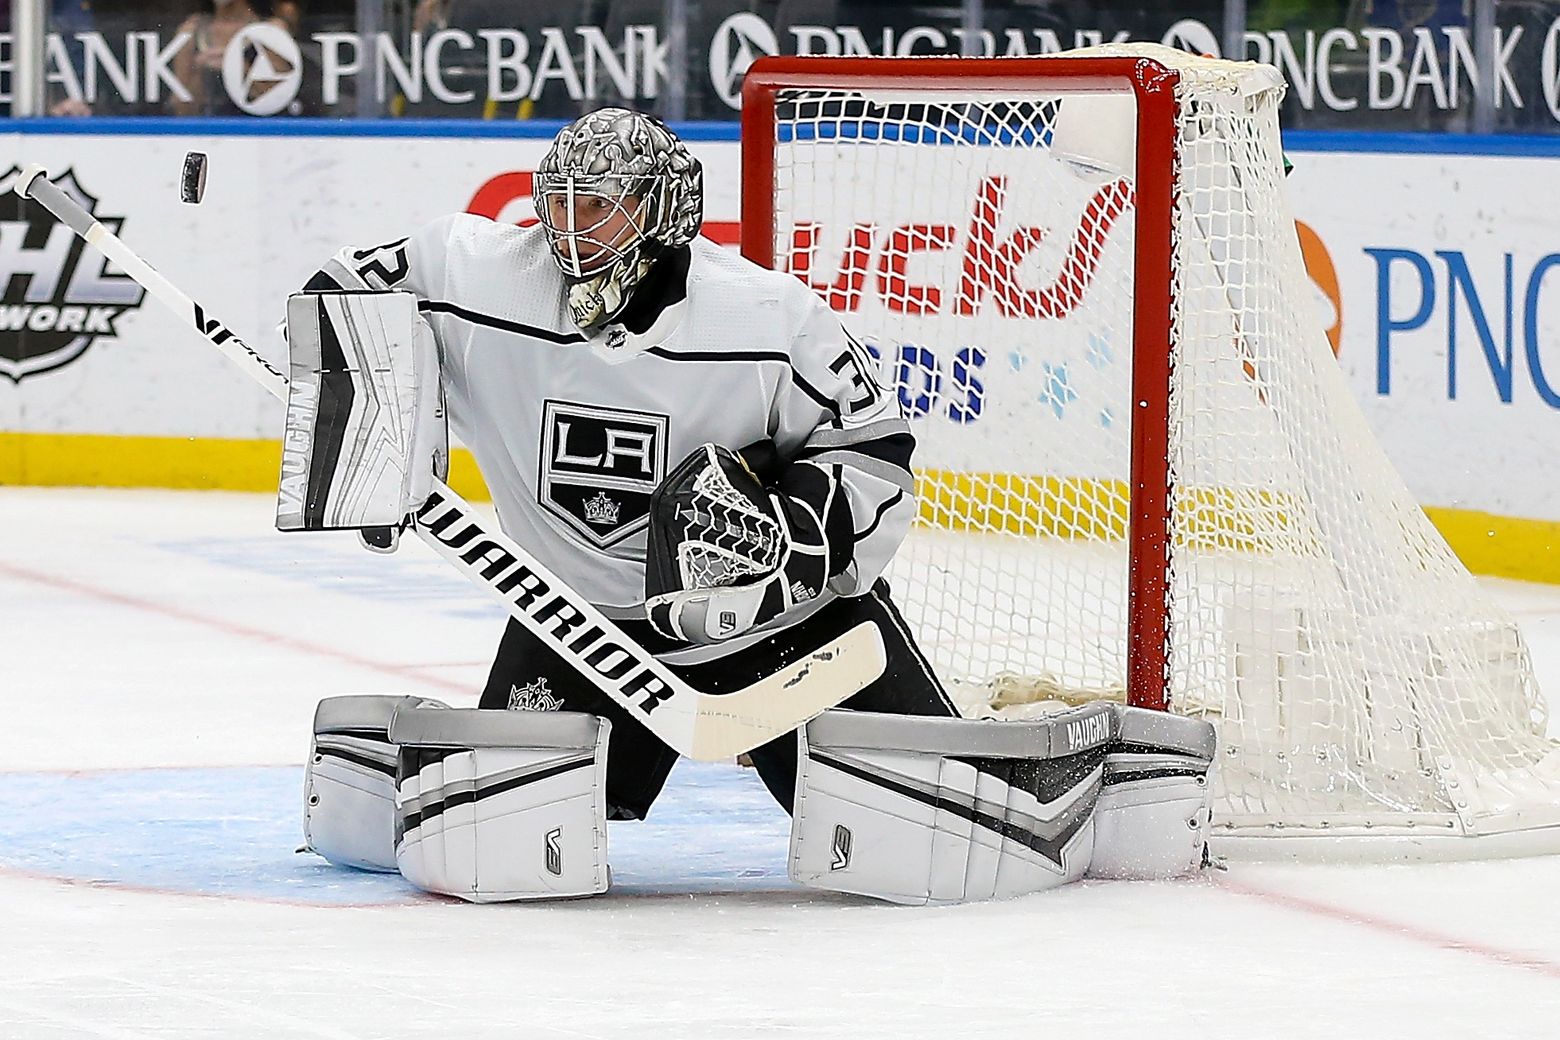 Jonathan Quick has wrist surgery after Stanley Cup win